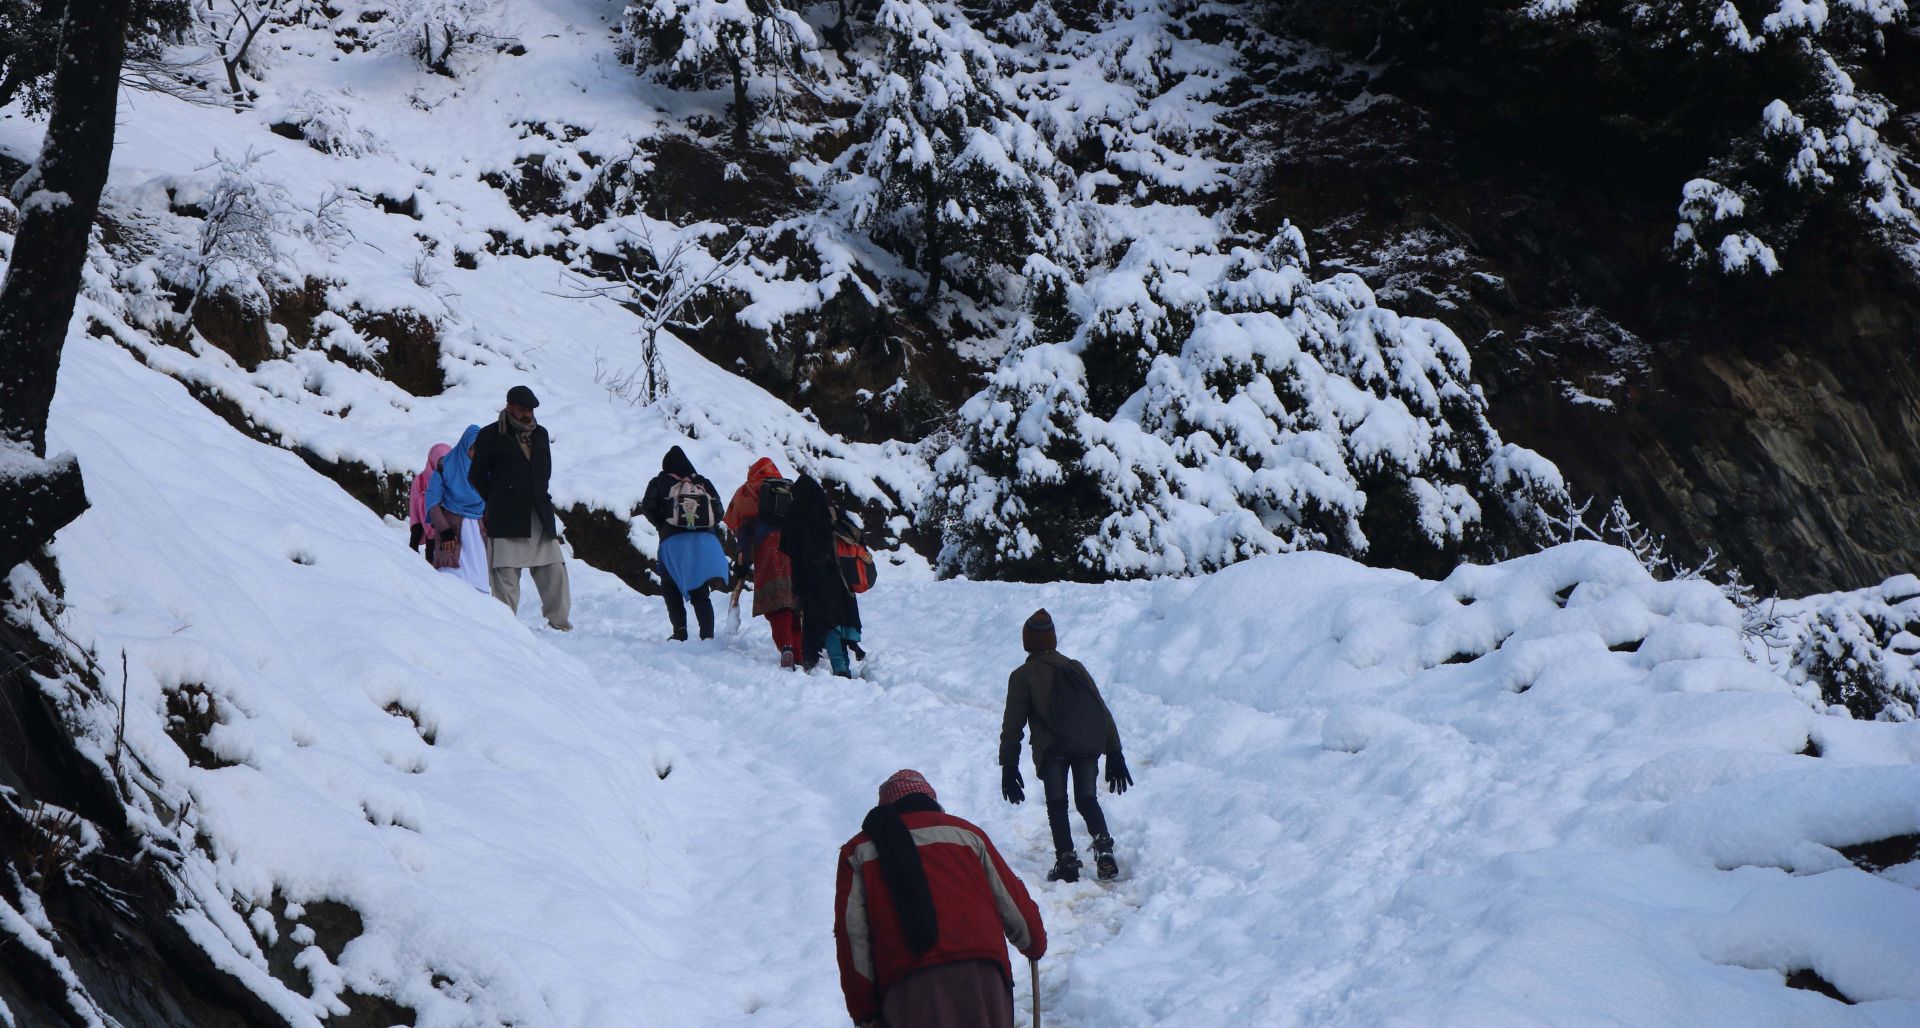 epa08126461 People walk on a snow-covered mountain path in Neelum valley, Pakistani administered Kashmir, 14 January 2020. At least 57 people were killed and several others were stranded when an avalanche hit villages in Neelum valley in Pakistani administered Kashmir. Many cities in Pakistan are experiencing unusual cold weather conditions during which regular daytime temperatures fall below zero degrees Celsius.  EPA/AMIRUDDIN MUGHAL